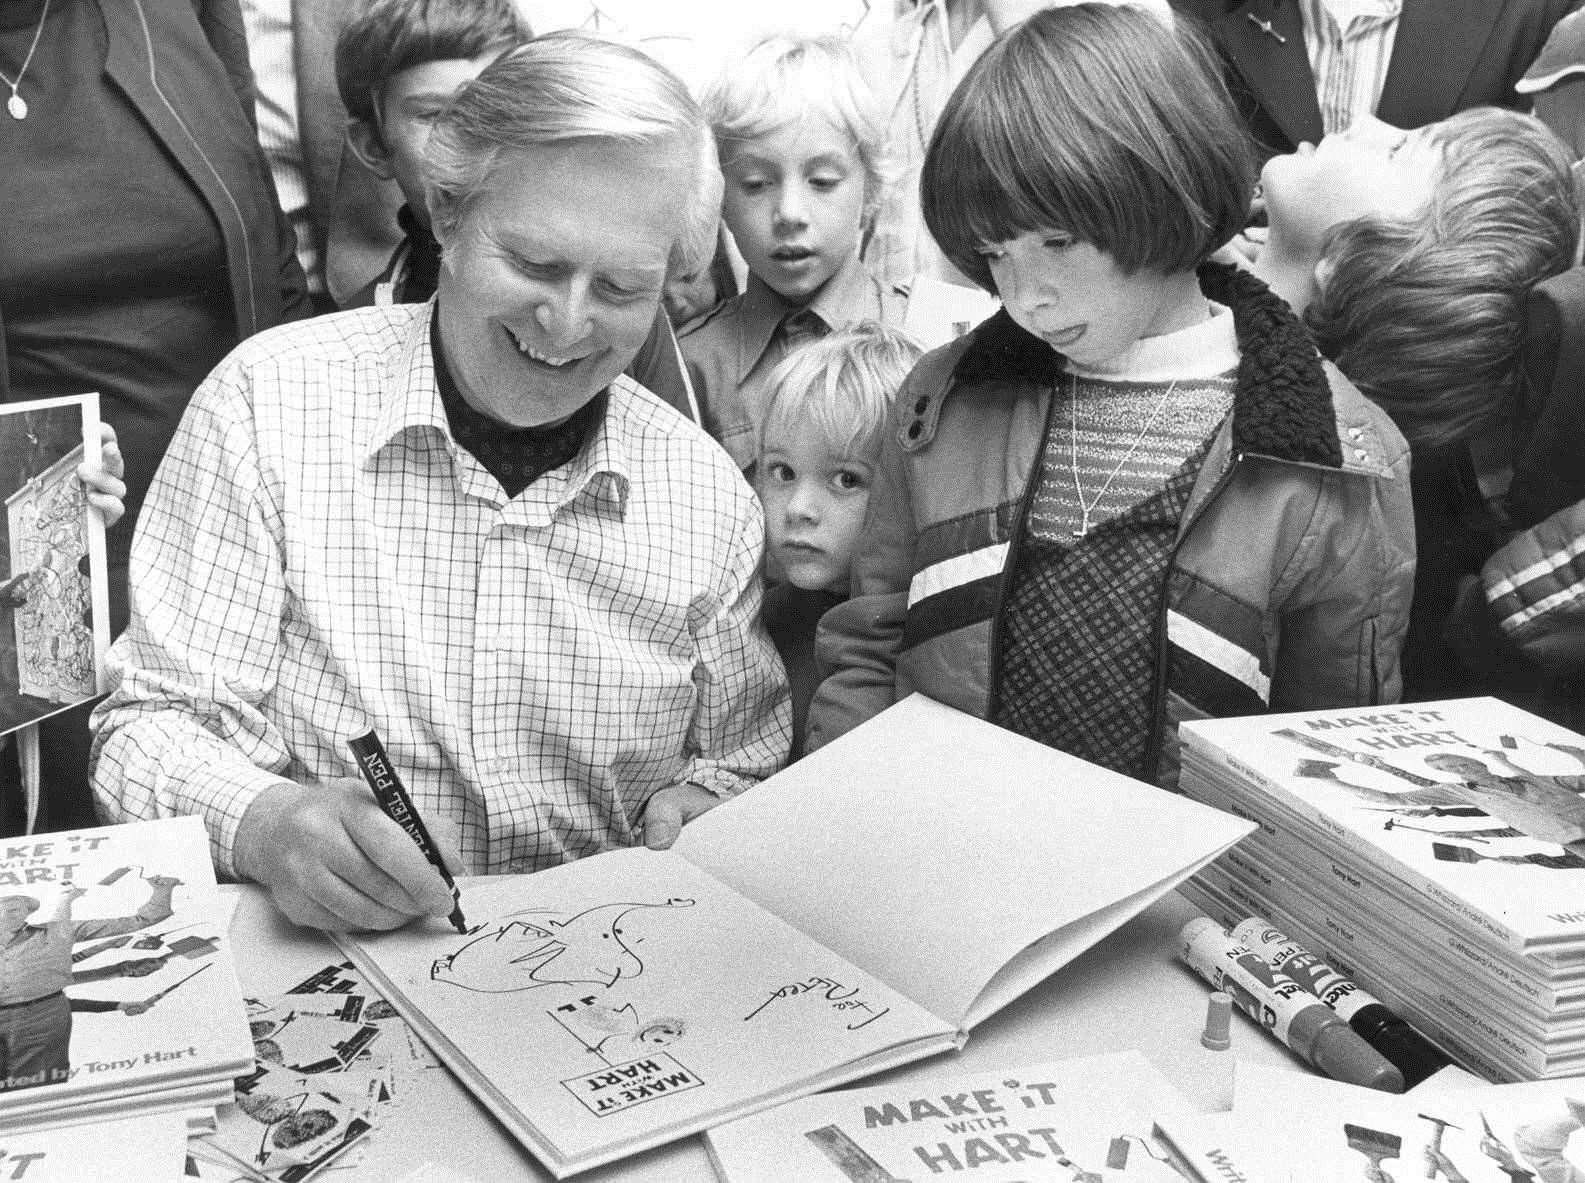 Tony Hart visiting W.H. Smiths in Maidstone High Street, 1979, with a young Derek Boyes (centre) watching the master at work over his shoulder